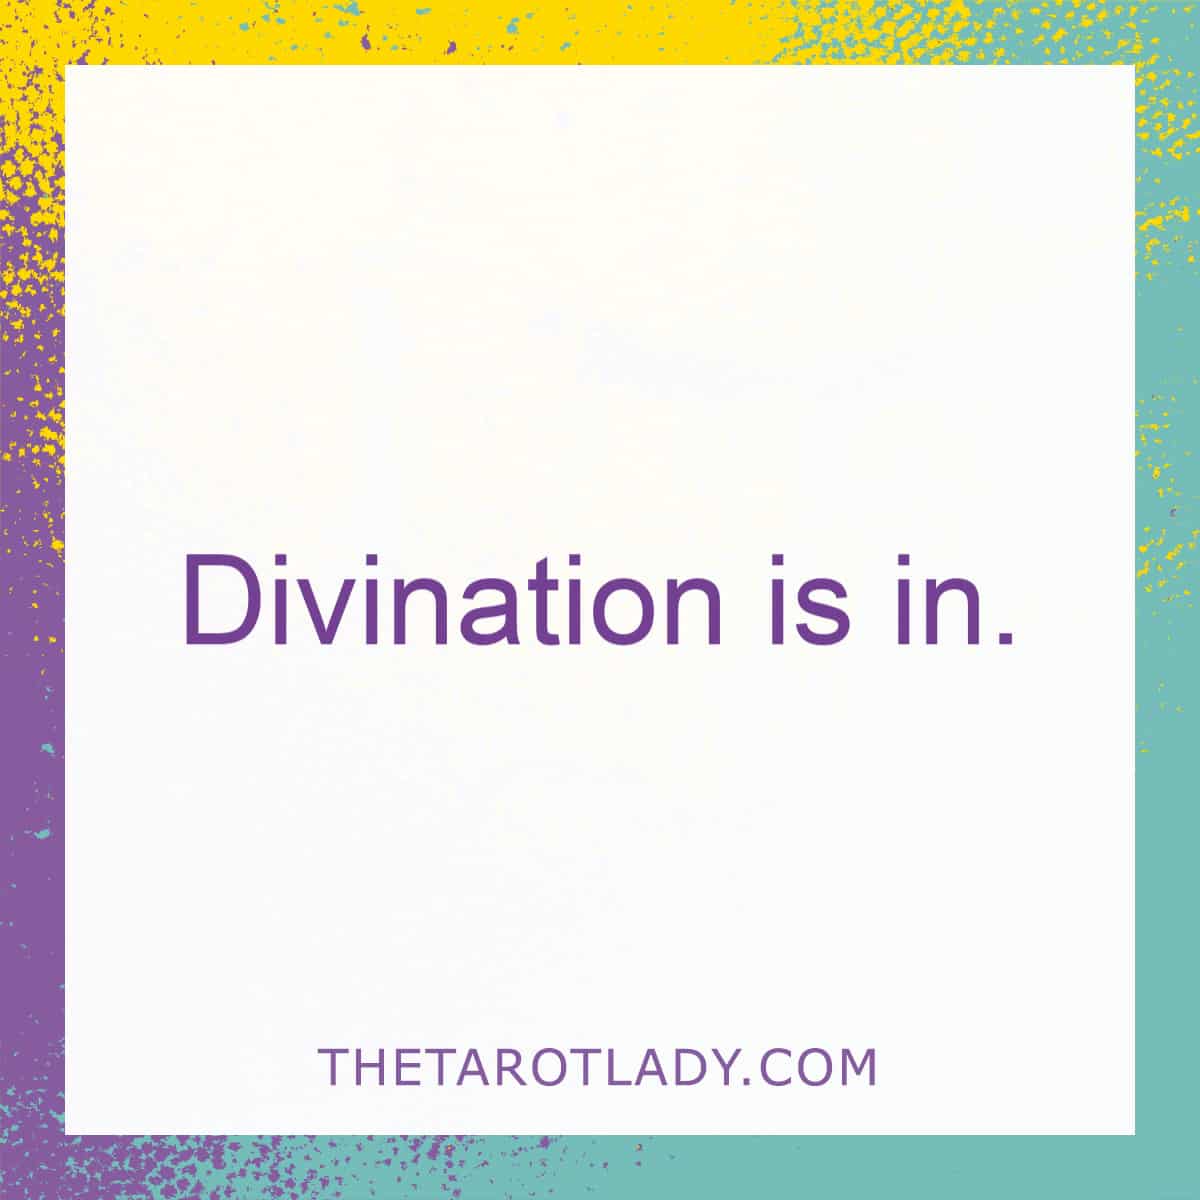 The Hit List - Divination is IN